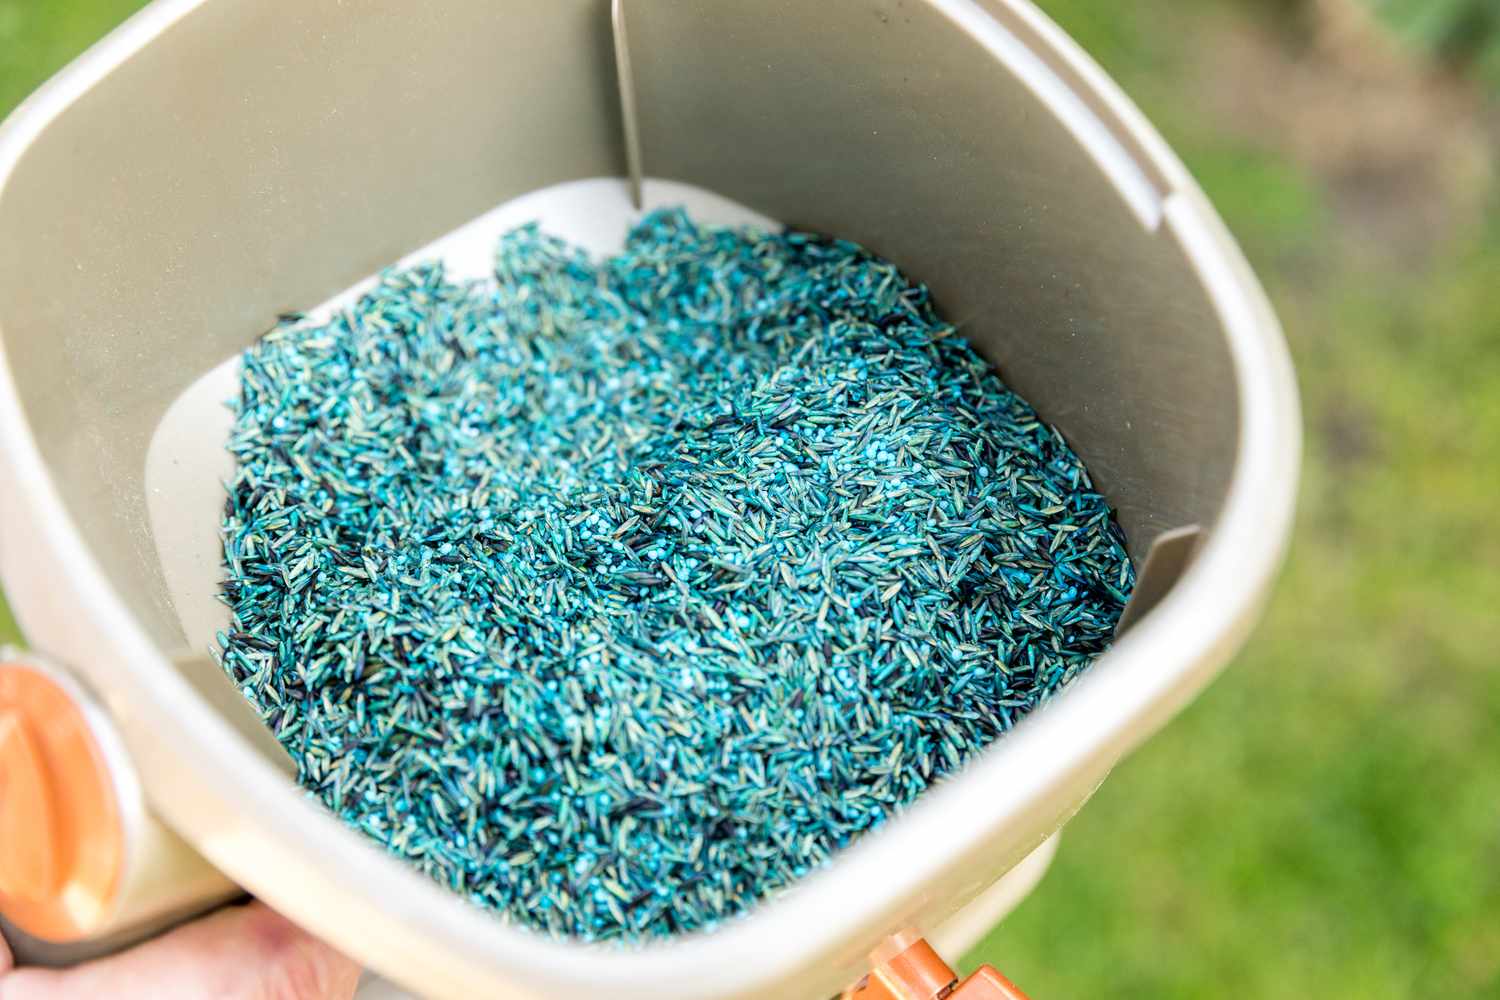 What Is The Blue Coating On Grass Seed